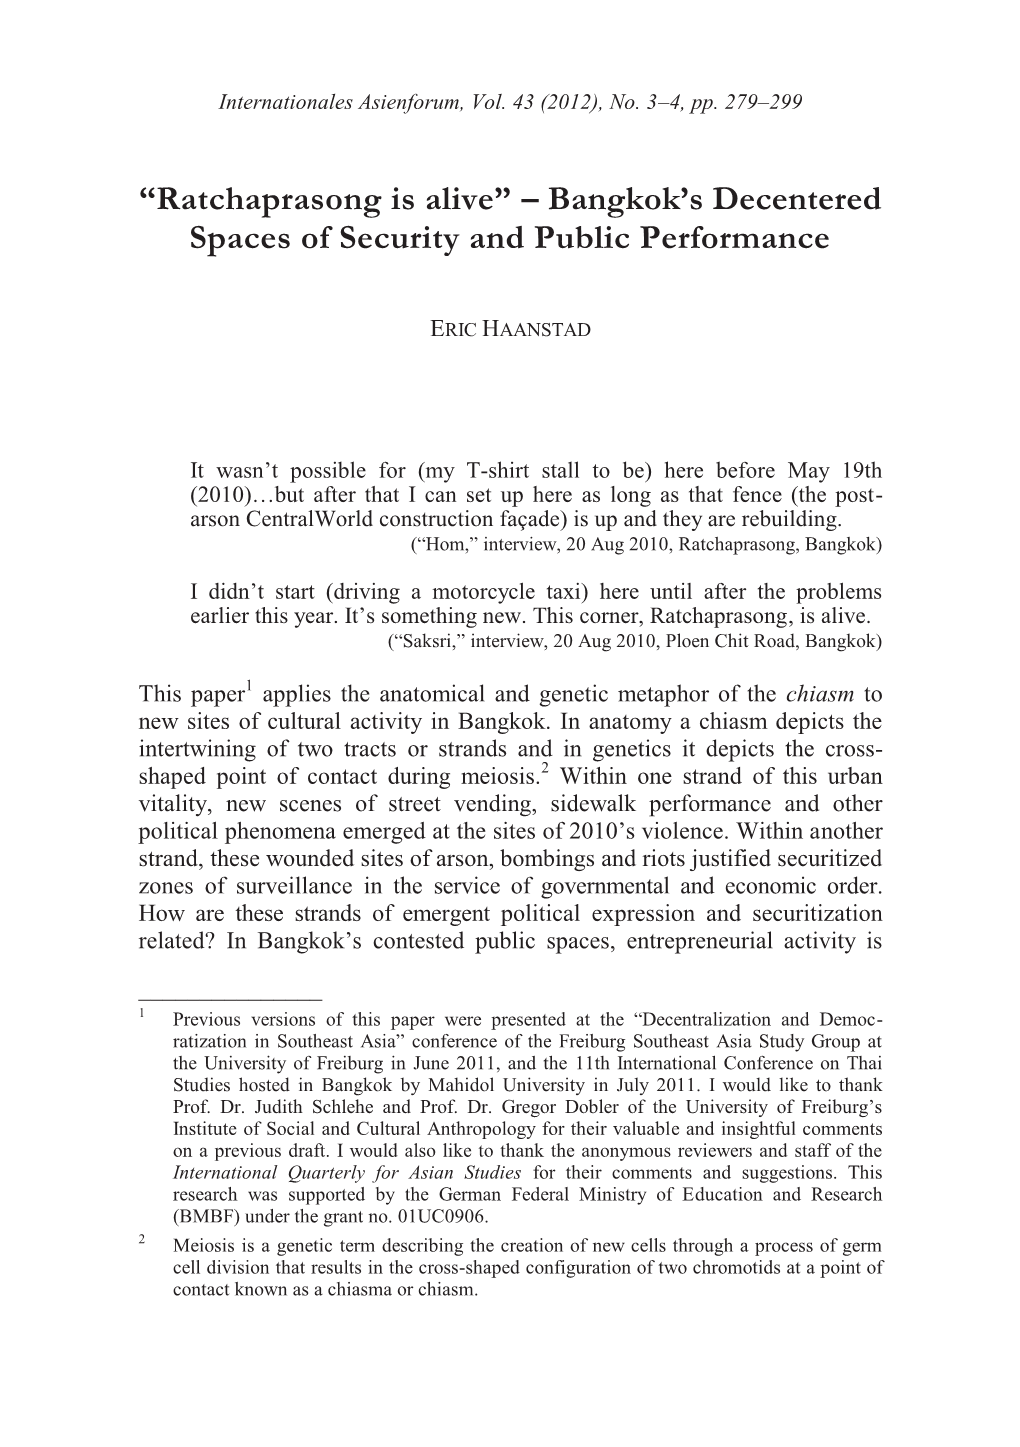 Bangkok's Decentered Spaces of Security and Public Performance